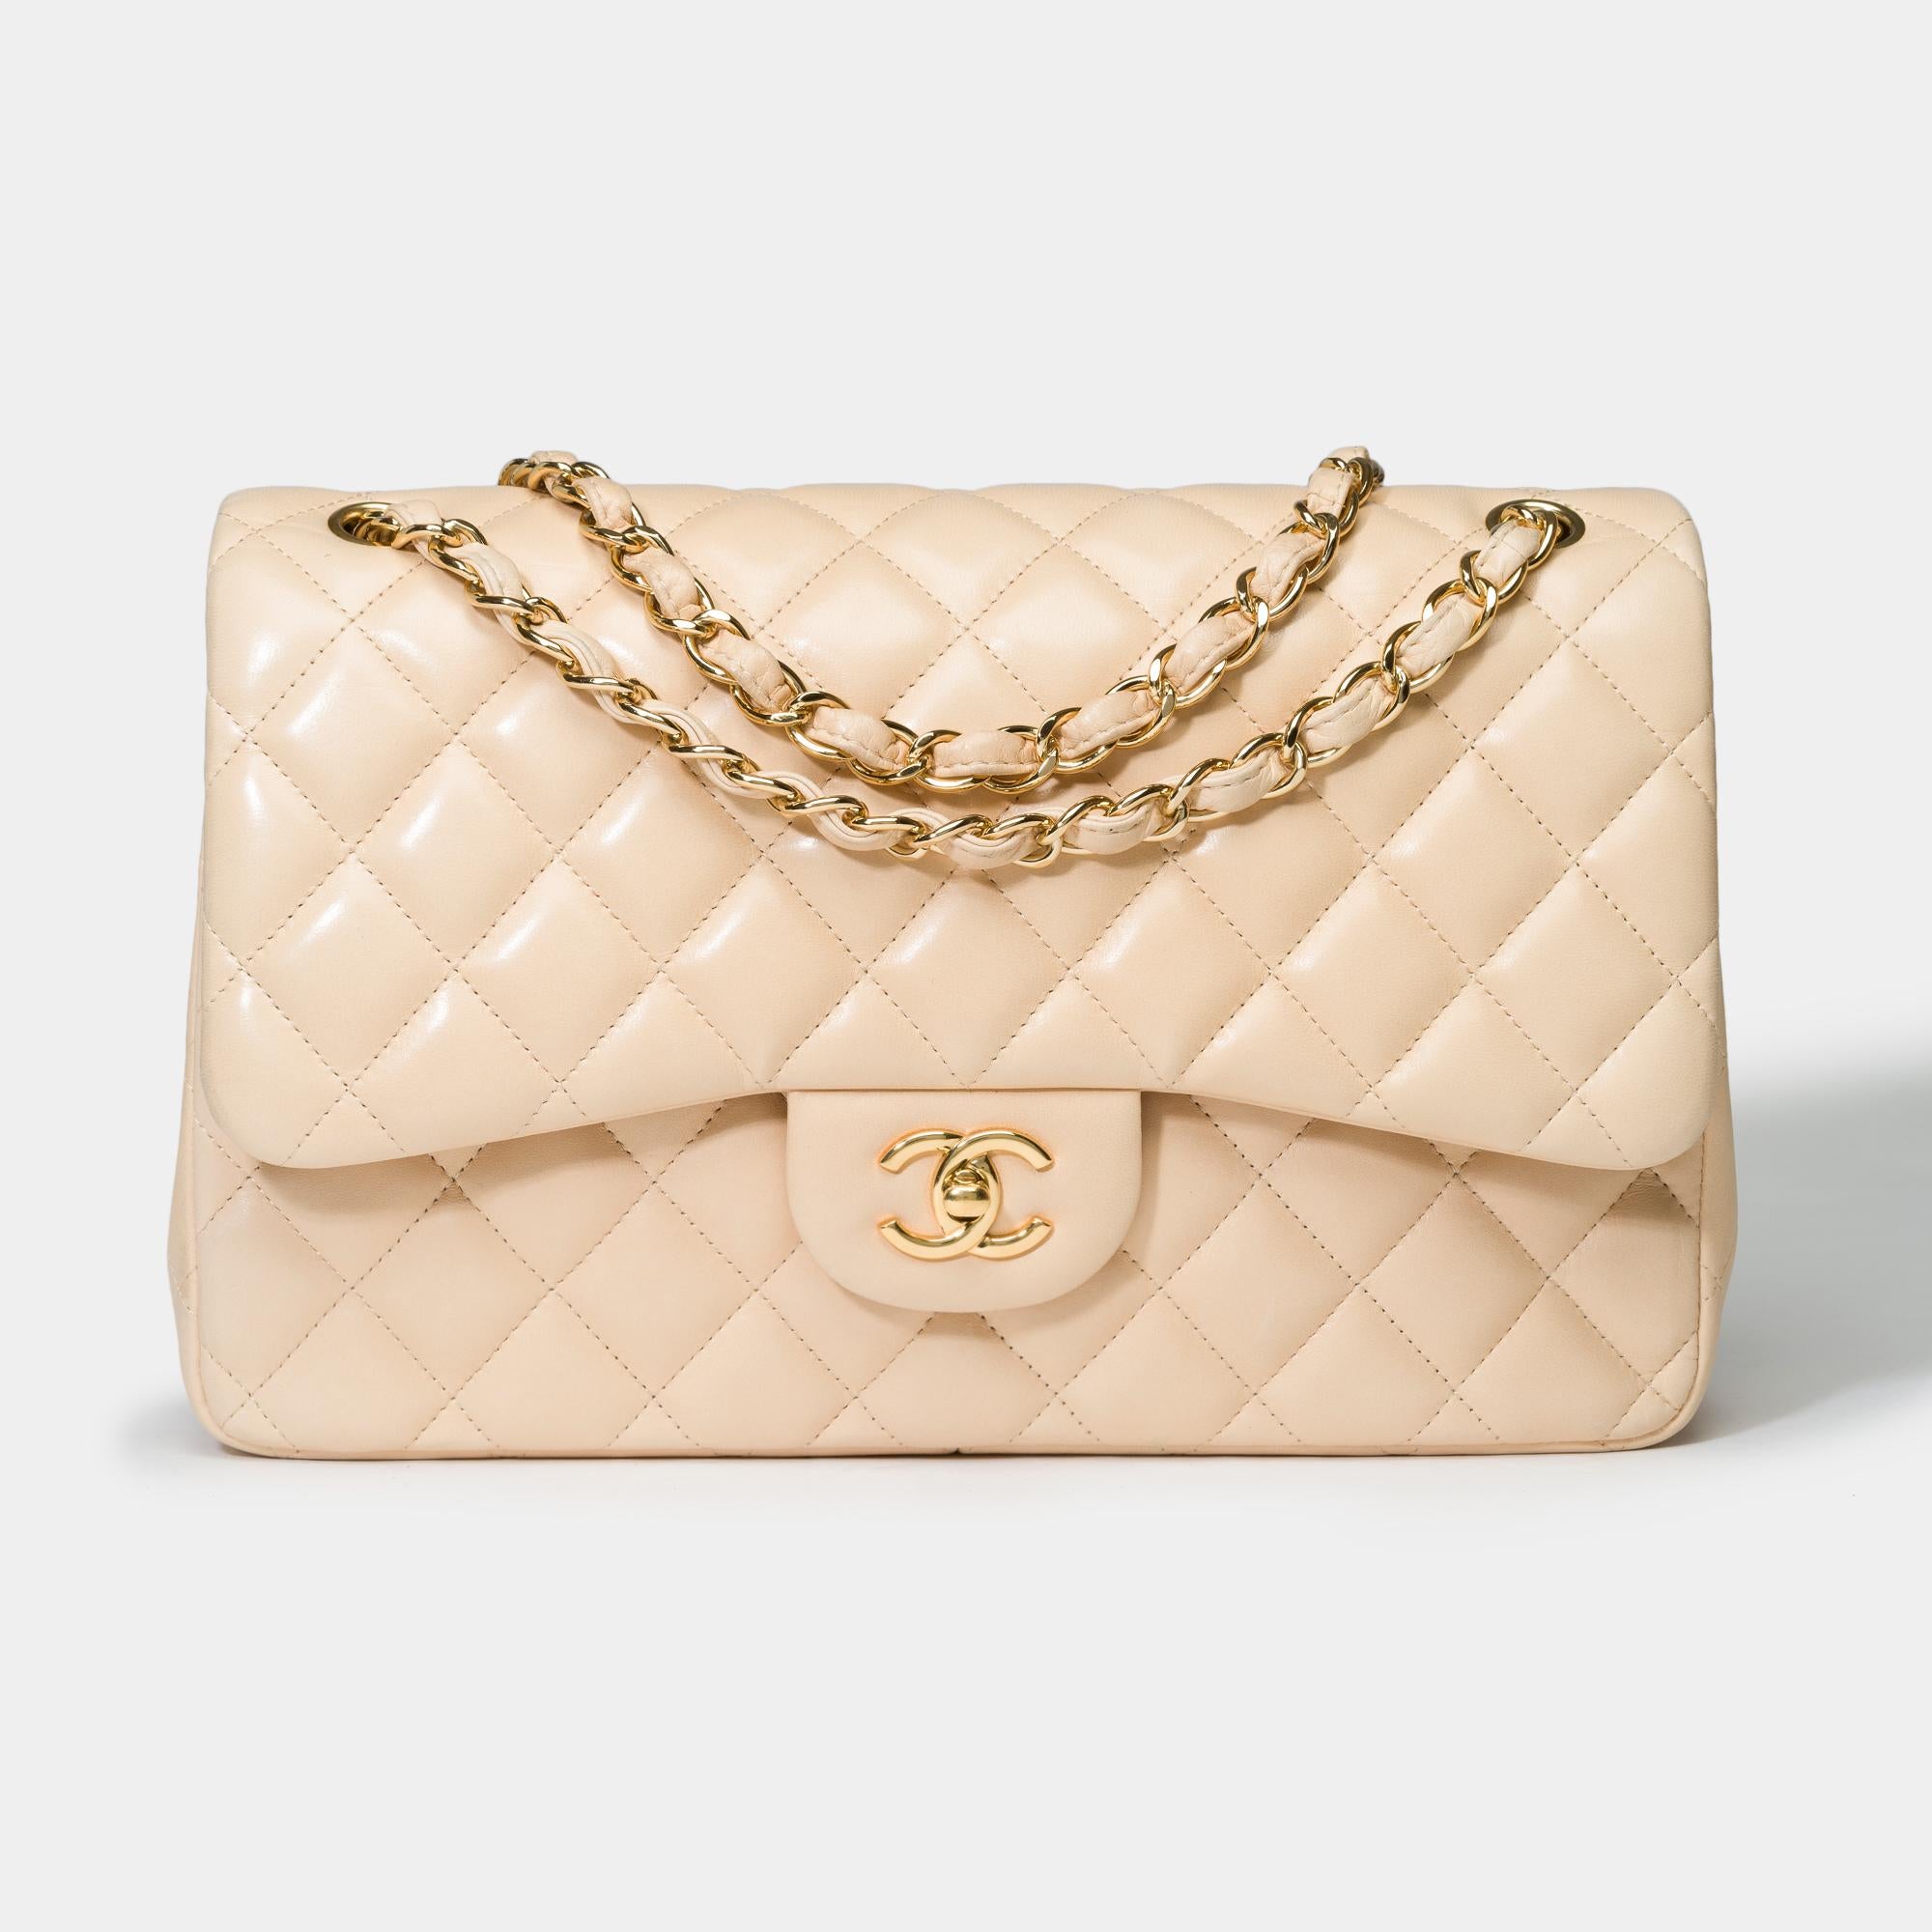 Stunning​ ​Chanel​ ​Timeless​ ​Jumbo​ ​double​ ​flap​ ​shoulder​ ​bag​ ​in​ ​beige​ ​quilted​ ​lambskin​ ​leather,​ ​gold​ ​metal​ ​trim,​ ​a​ ​gold​ ​metal​ ​chain​ ​handle​ ​interlaced​ ​with​ ​beige​ ​leather​ ​for​ ​a​ ​hand​ ​or​ ​shoulder​